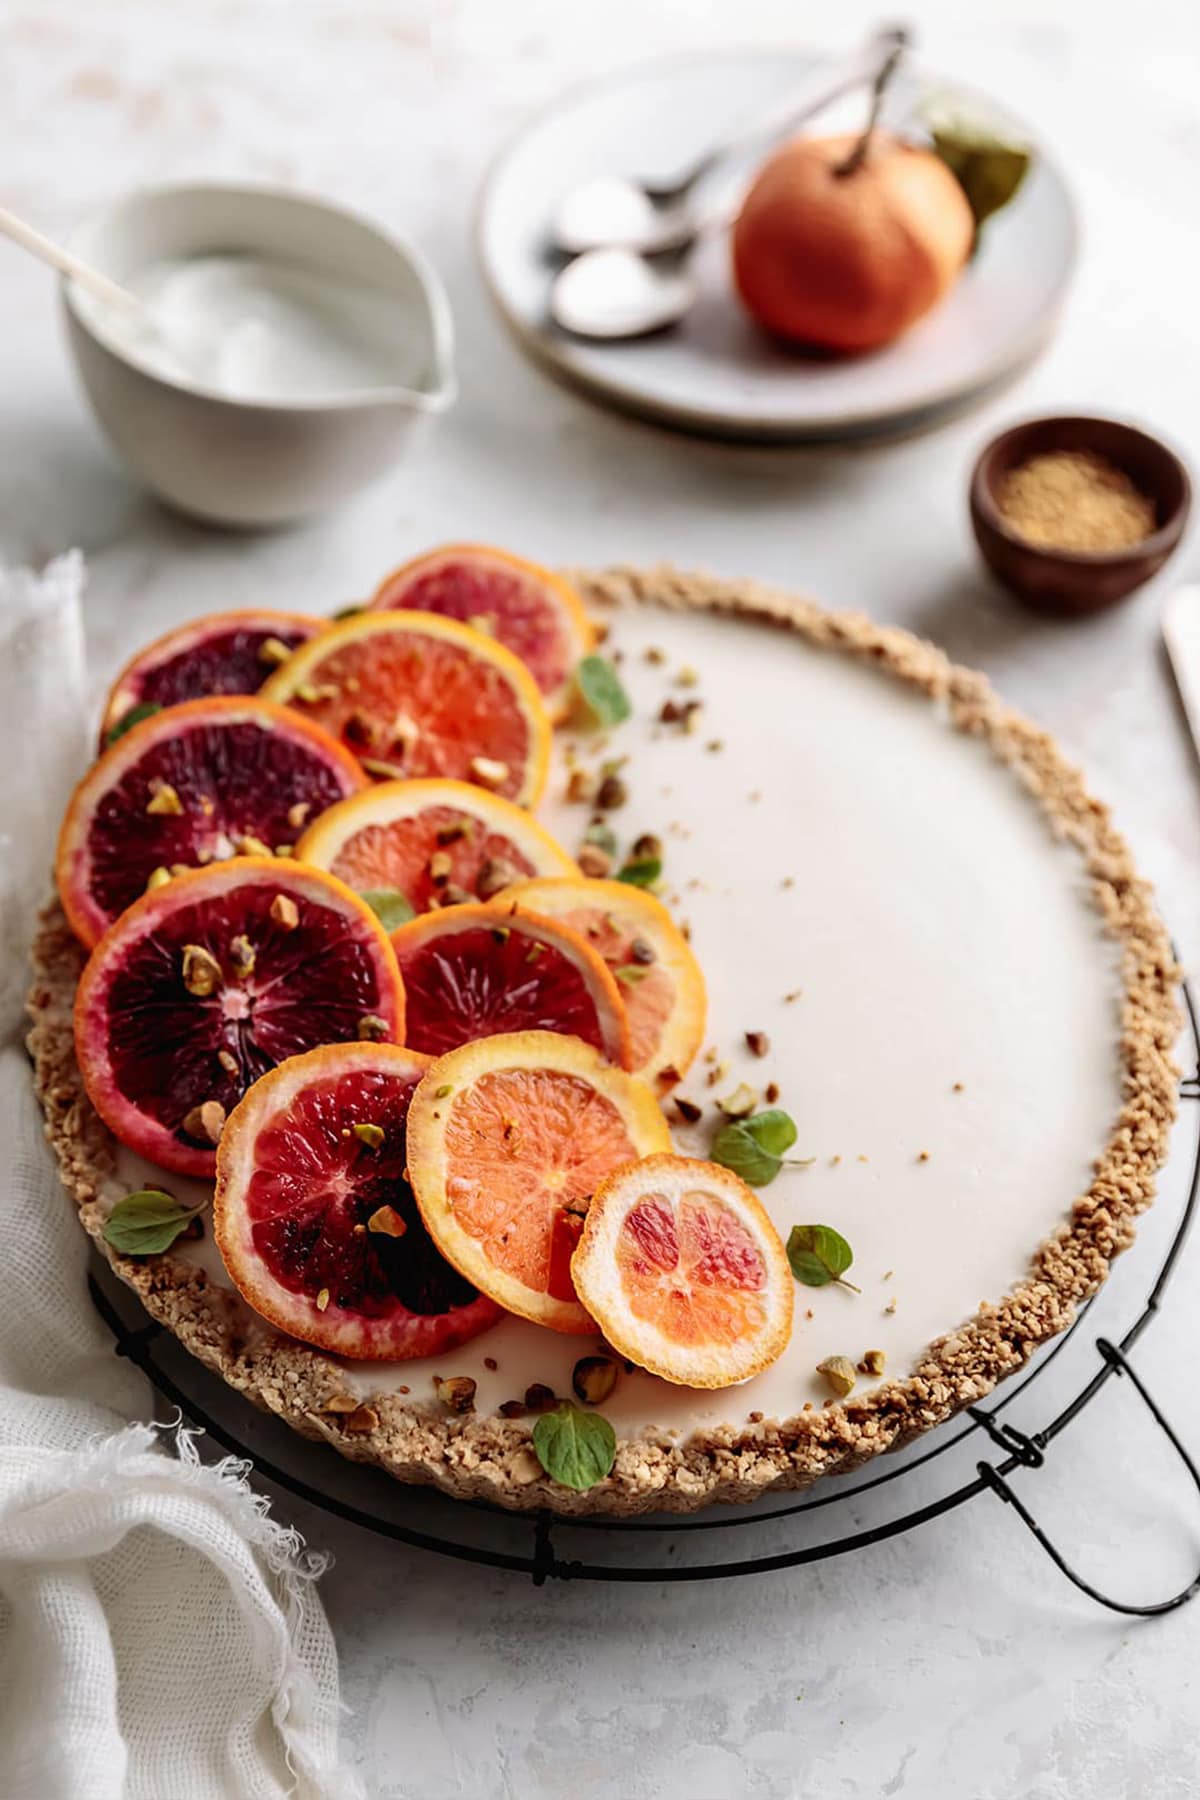 Easy No-Bake Greek Yogurt Tart topped with fresh blood oranges comes together in minutes. It's made with a gluten-free crust with oats, almonds and honey. Perfect for brunch or dessert on a spring/summer day.